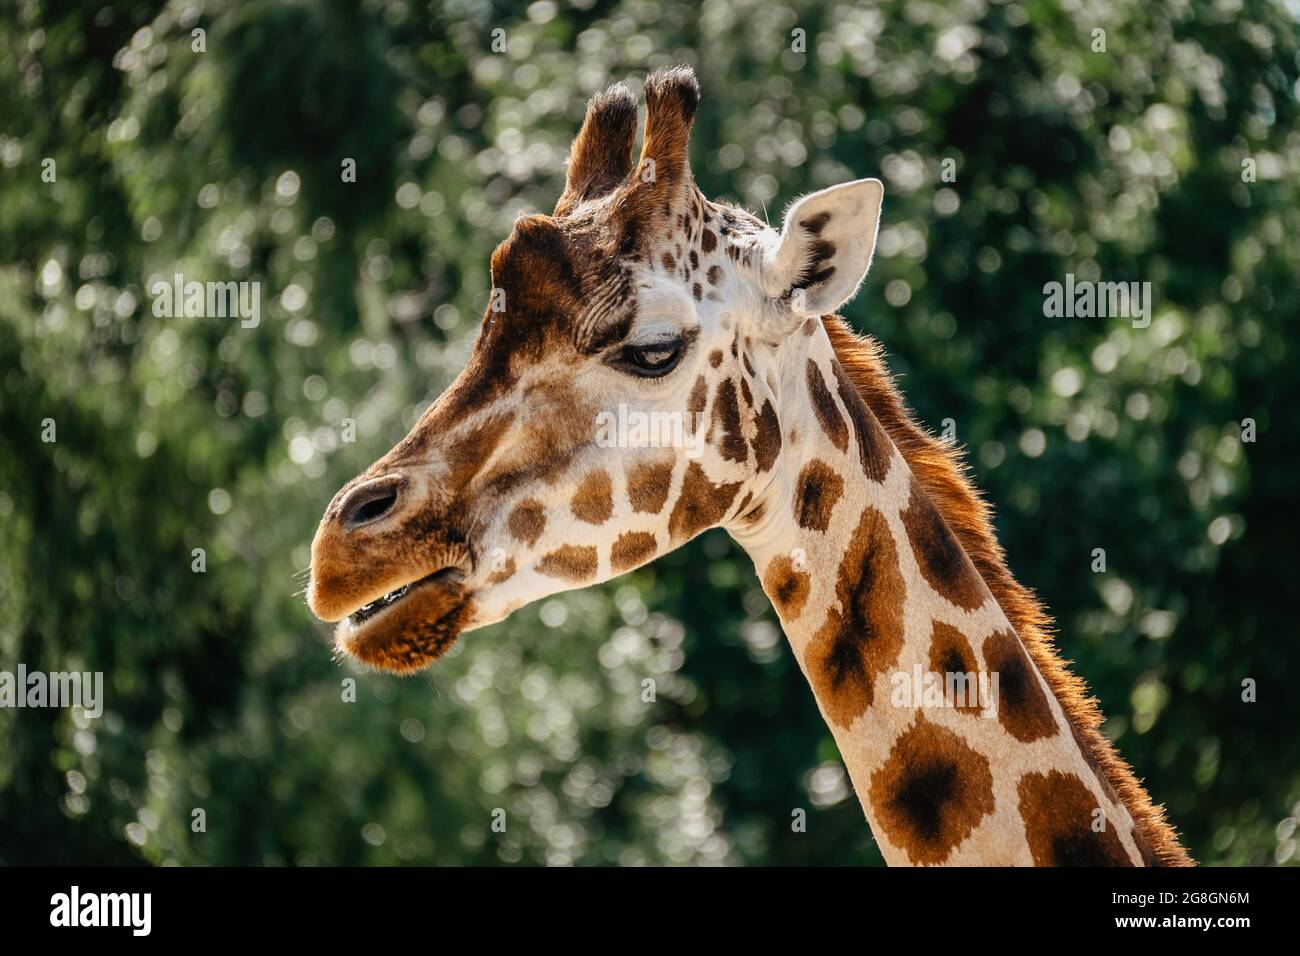 Rothschild giraffe in ZOO.Giraffe in front of green trees looking in to camera. Funny giraffe face. Front view of giraffe against green blurred foliag Stock Photo